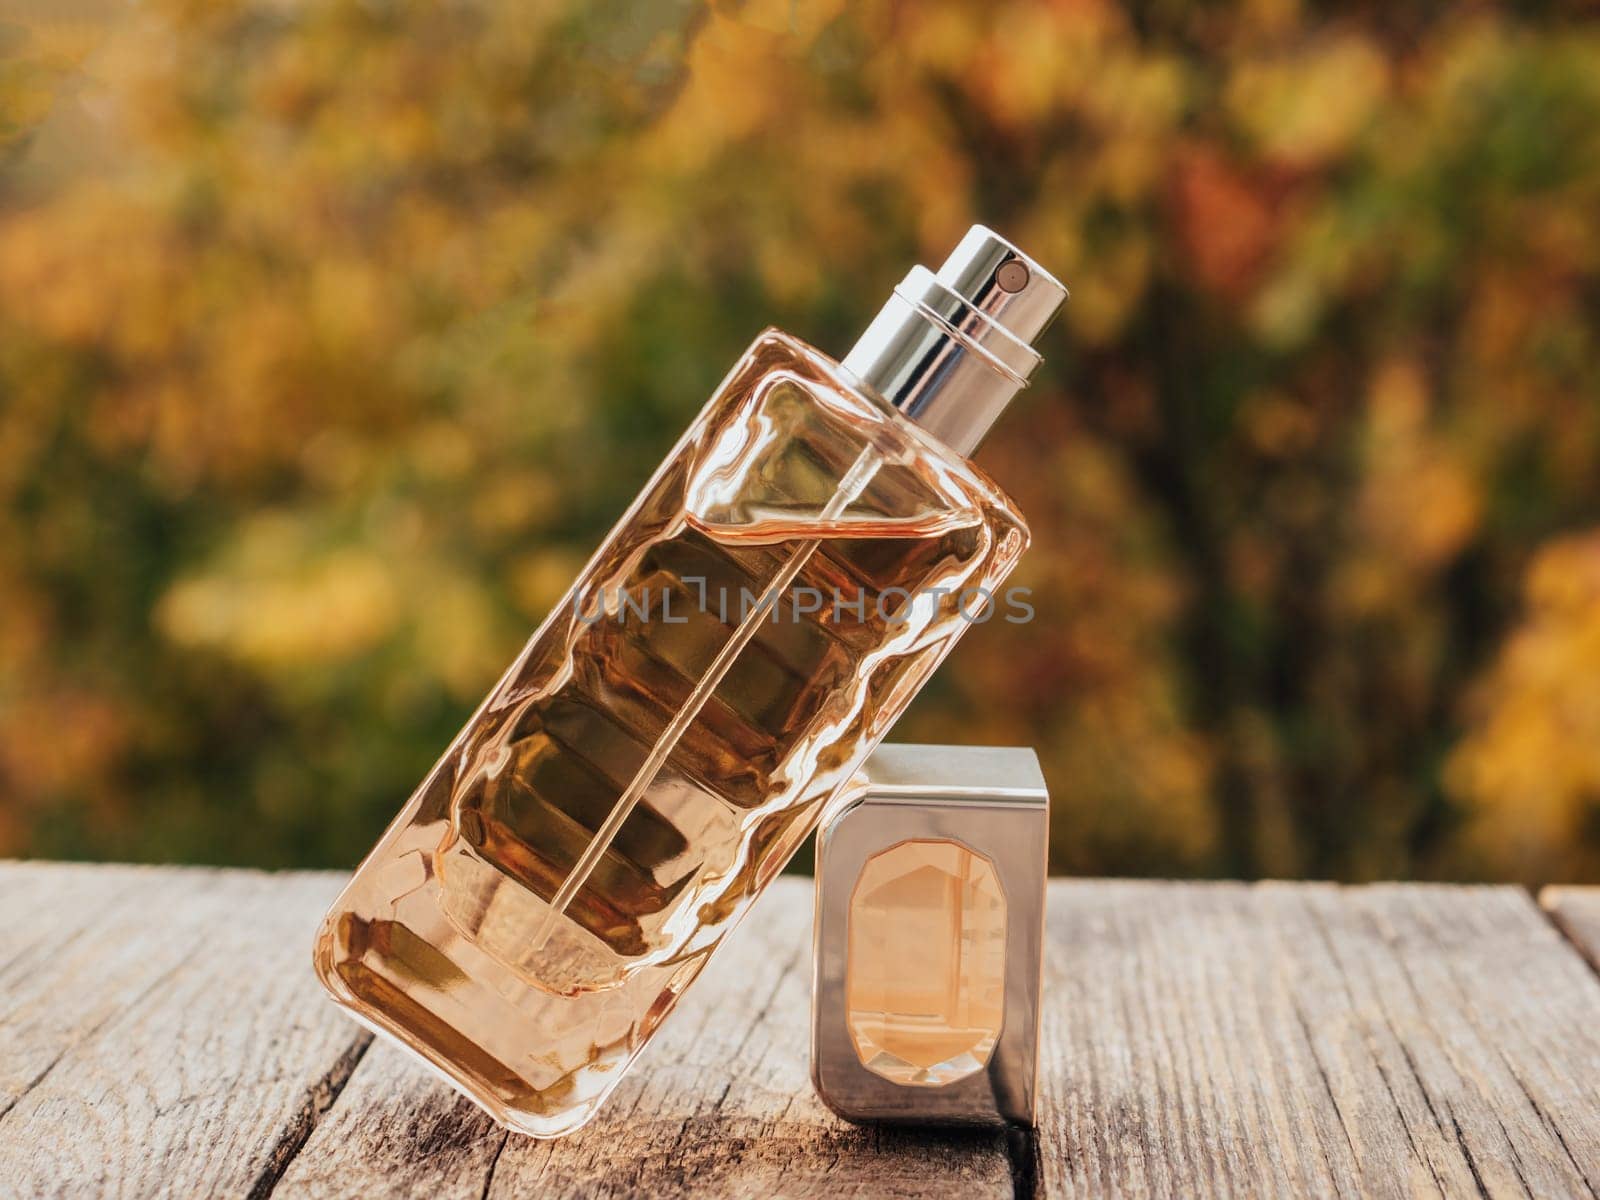 Minimalistic packing, branding. Perfume glass bottle on a autumn blurred background. Toilet water, still life. Flat lay composition, decoration design. Soft focus. Sales and beauty business concept.